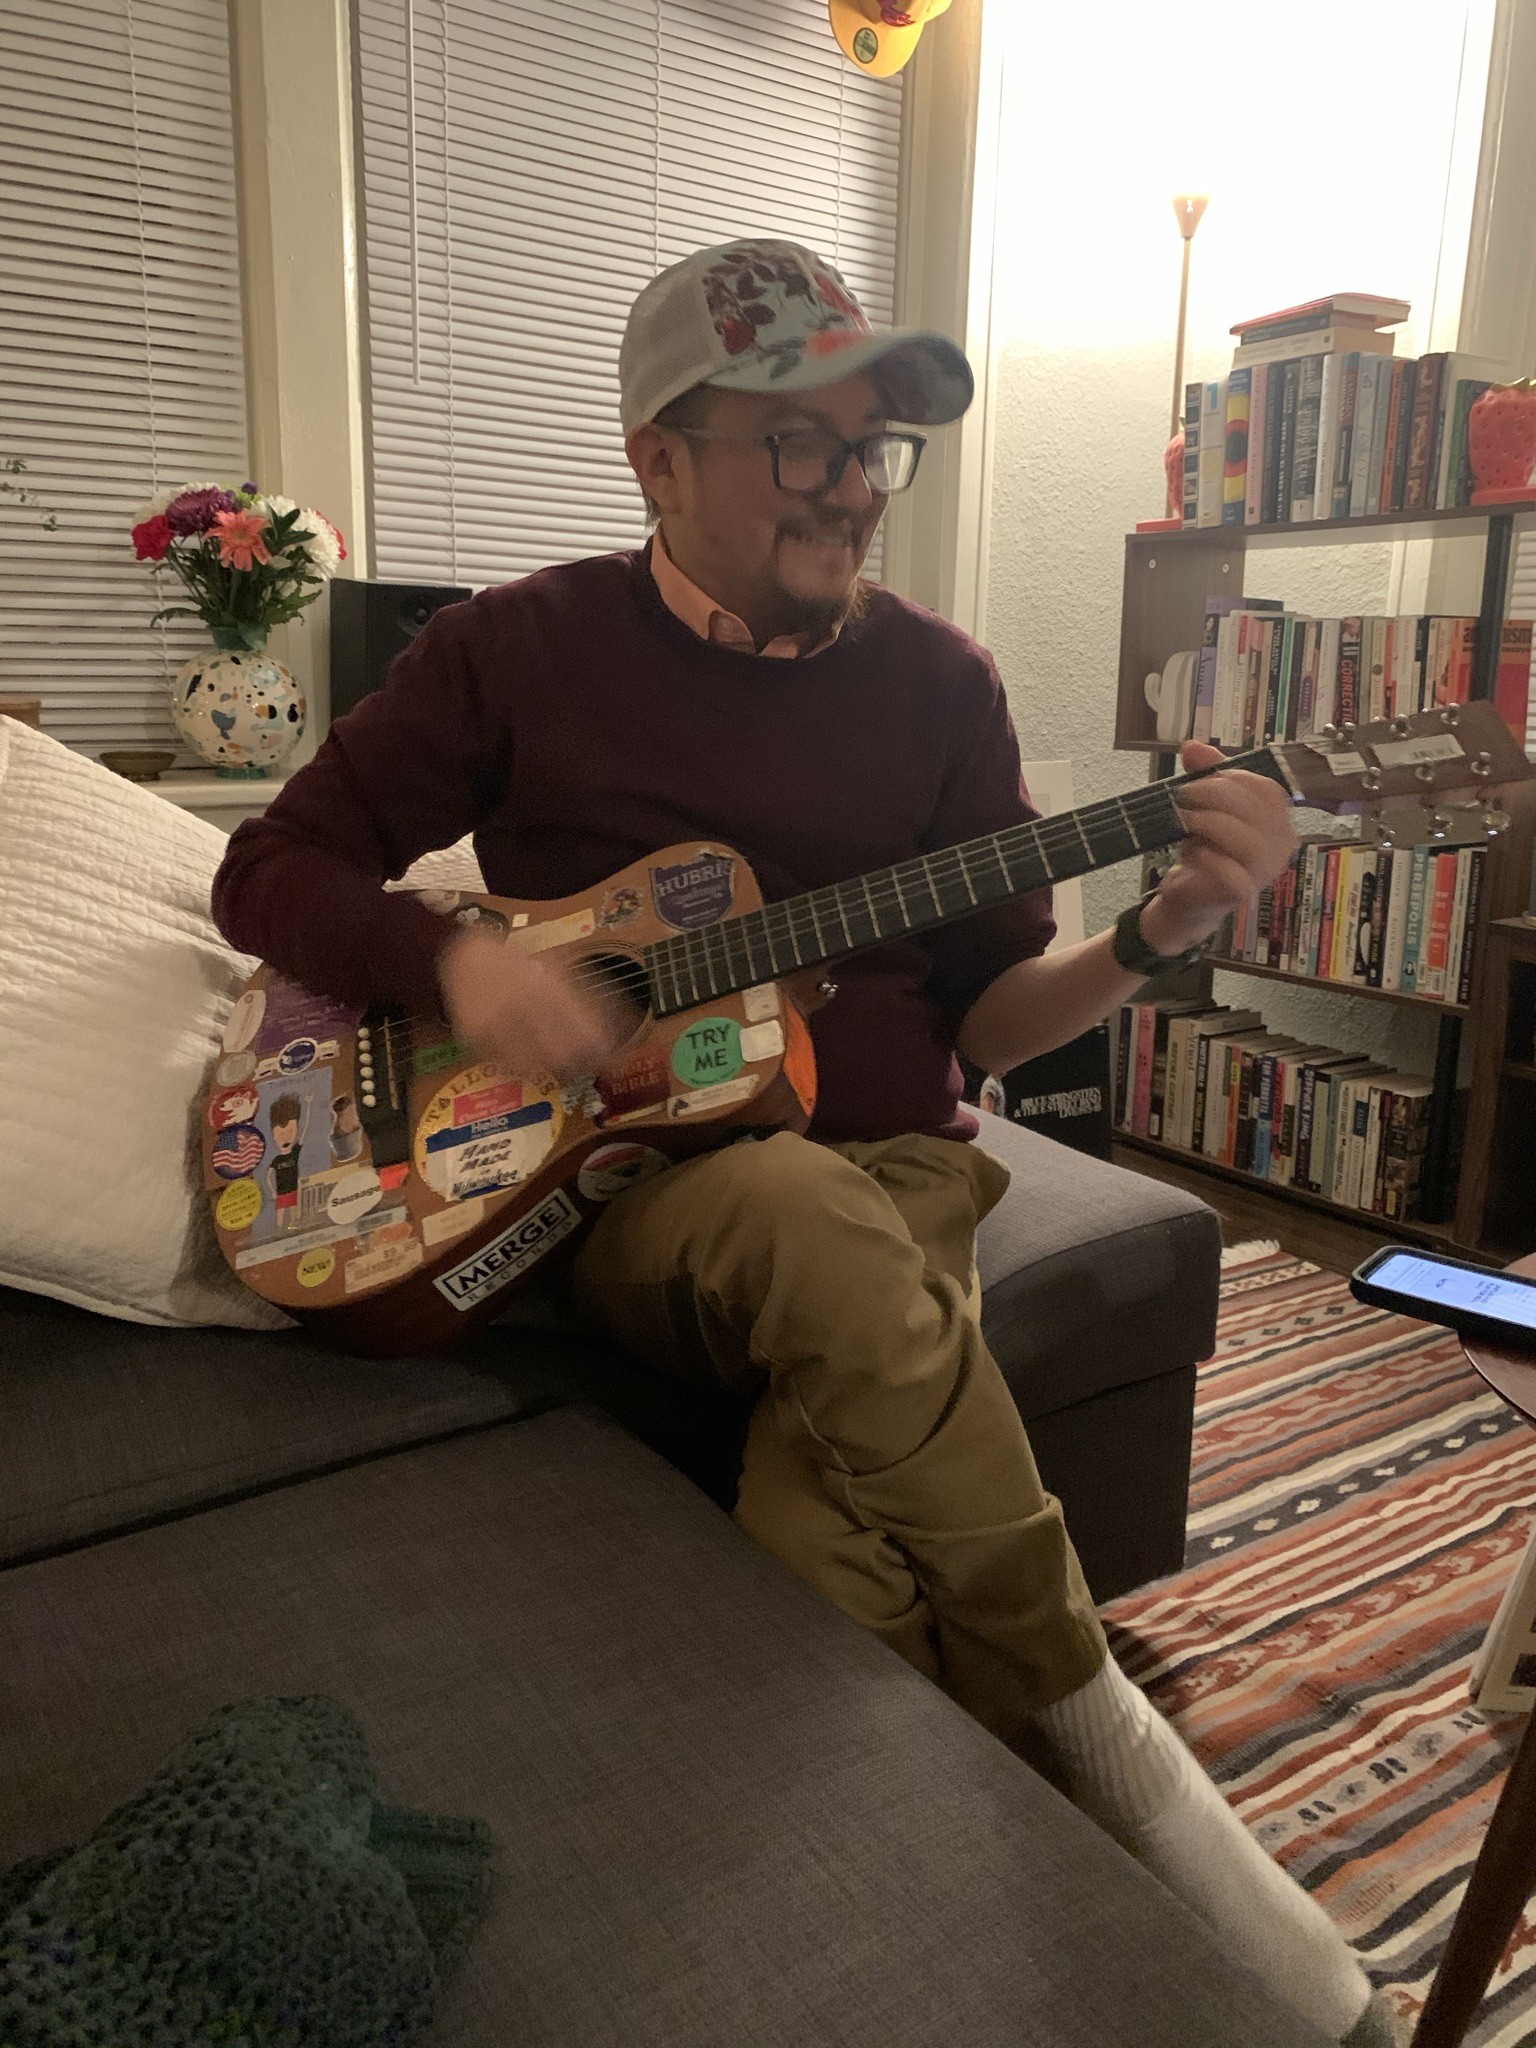 Franklin is seated on the end of a sectional couch, cross-legged, playing a guitar with a lot of stickers on it He is wearing khakis, a red sweater with a button down underneath, and a blue and floral trucker cap. He is looking at the frets of the guitar and smiling. Behind is a bookshelf, lamp, flowers in a vase, and shuttered windows.